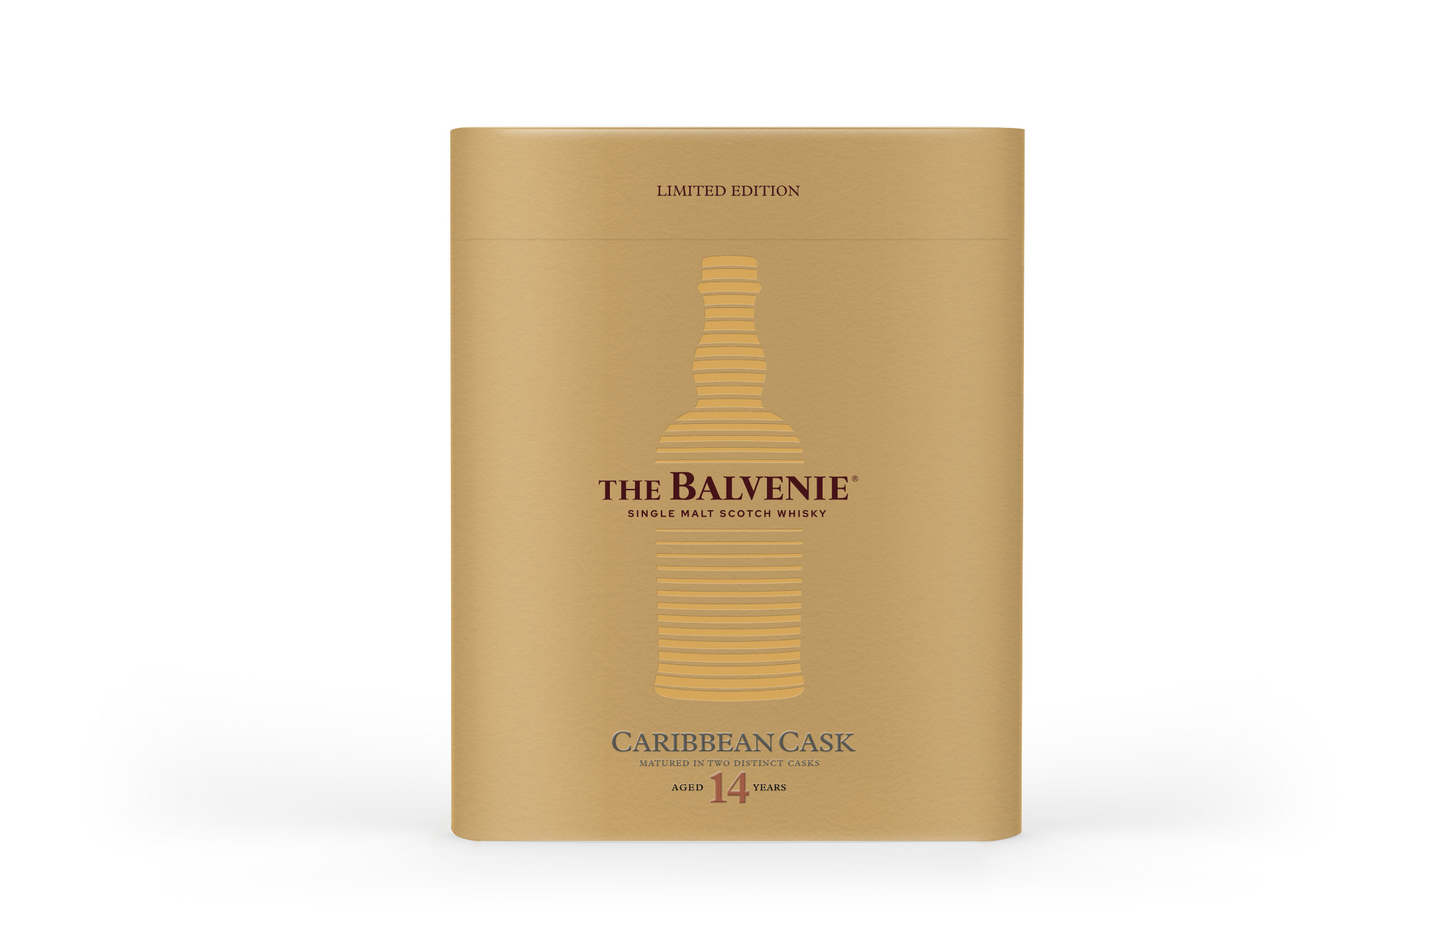 The Balvenie 14 Year Old Makers Pack